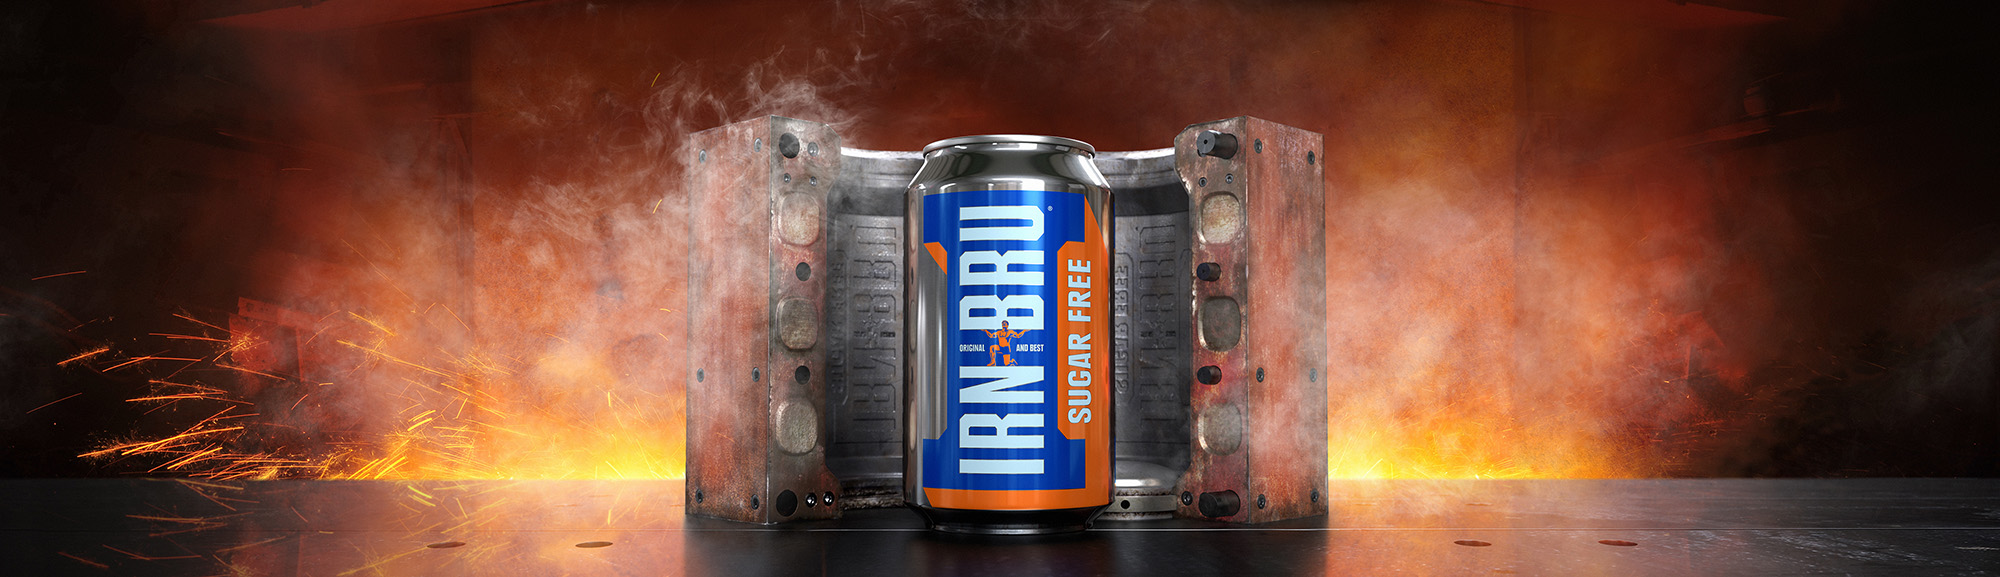 IRN BRU New Can Mold